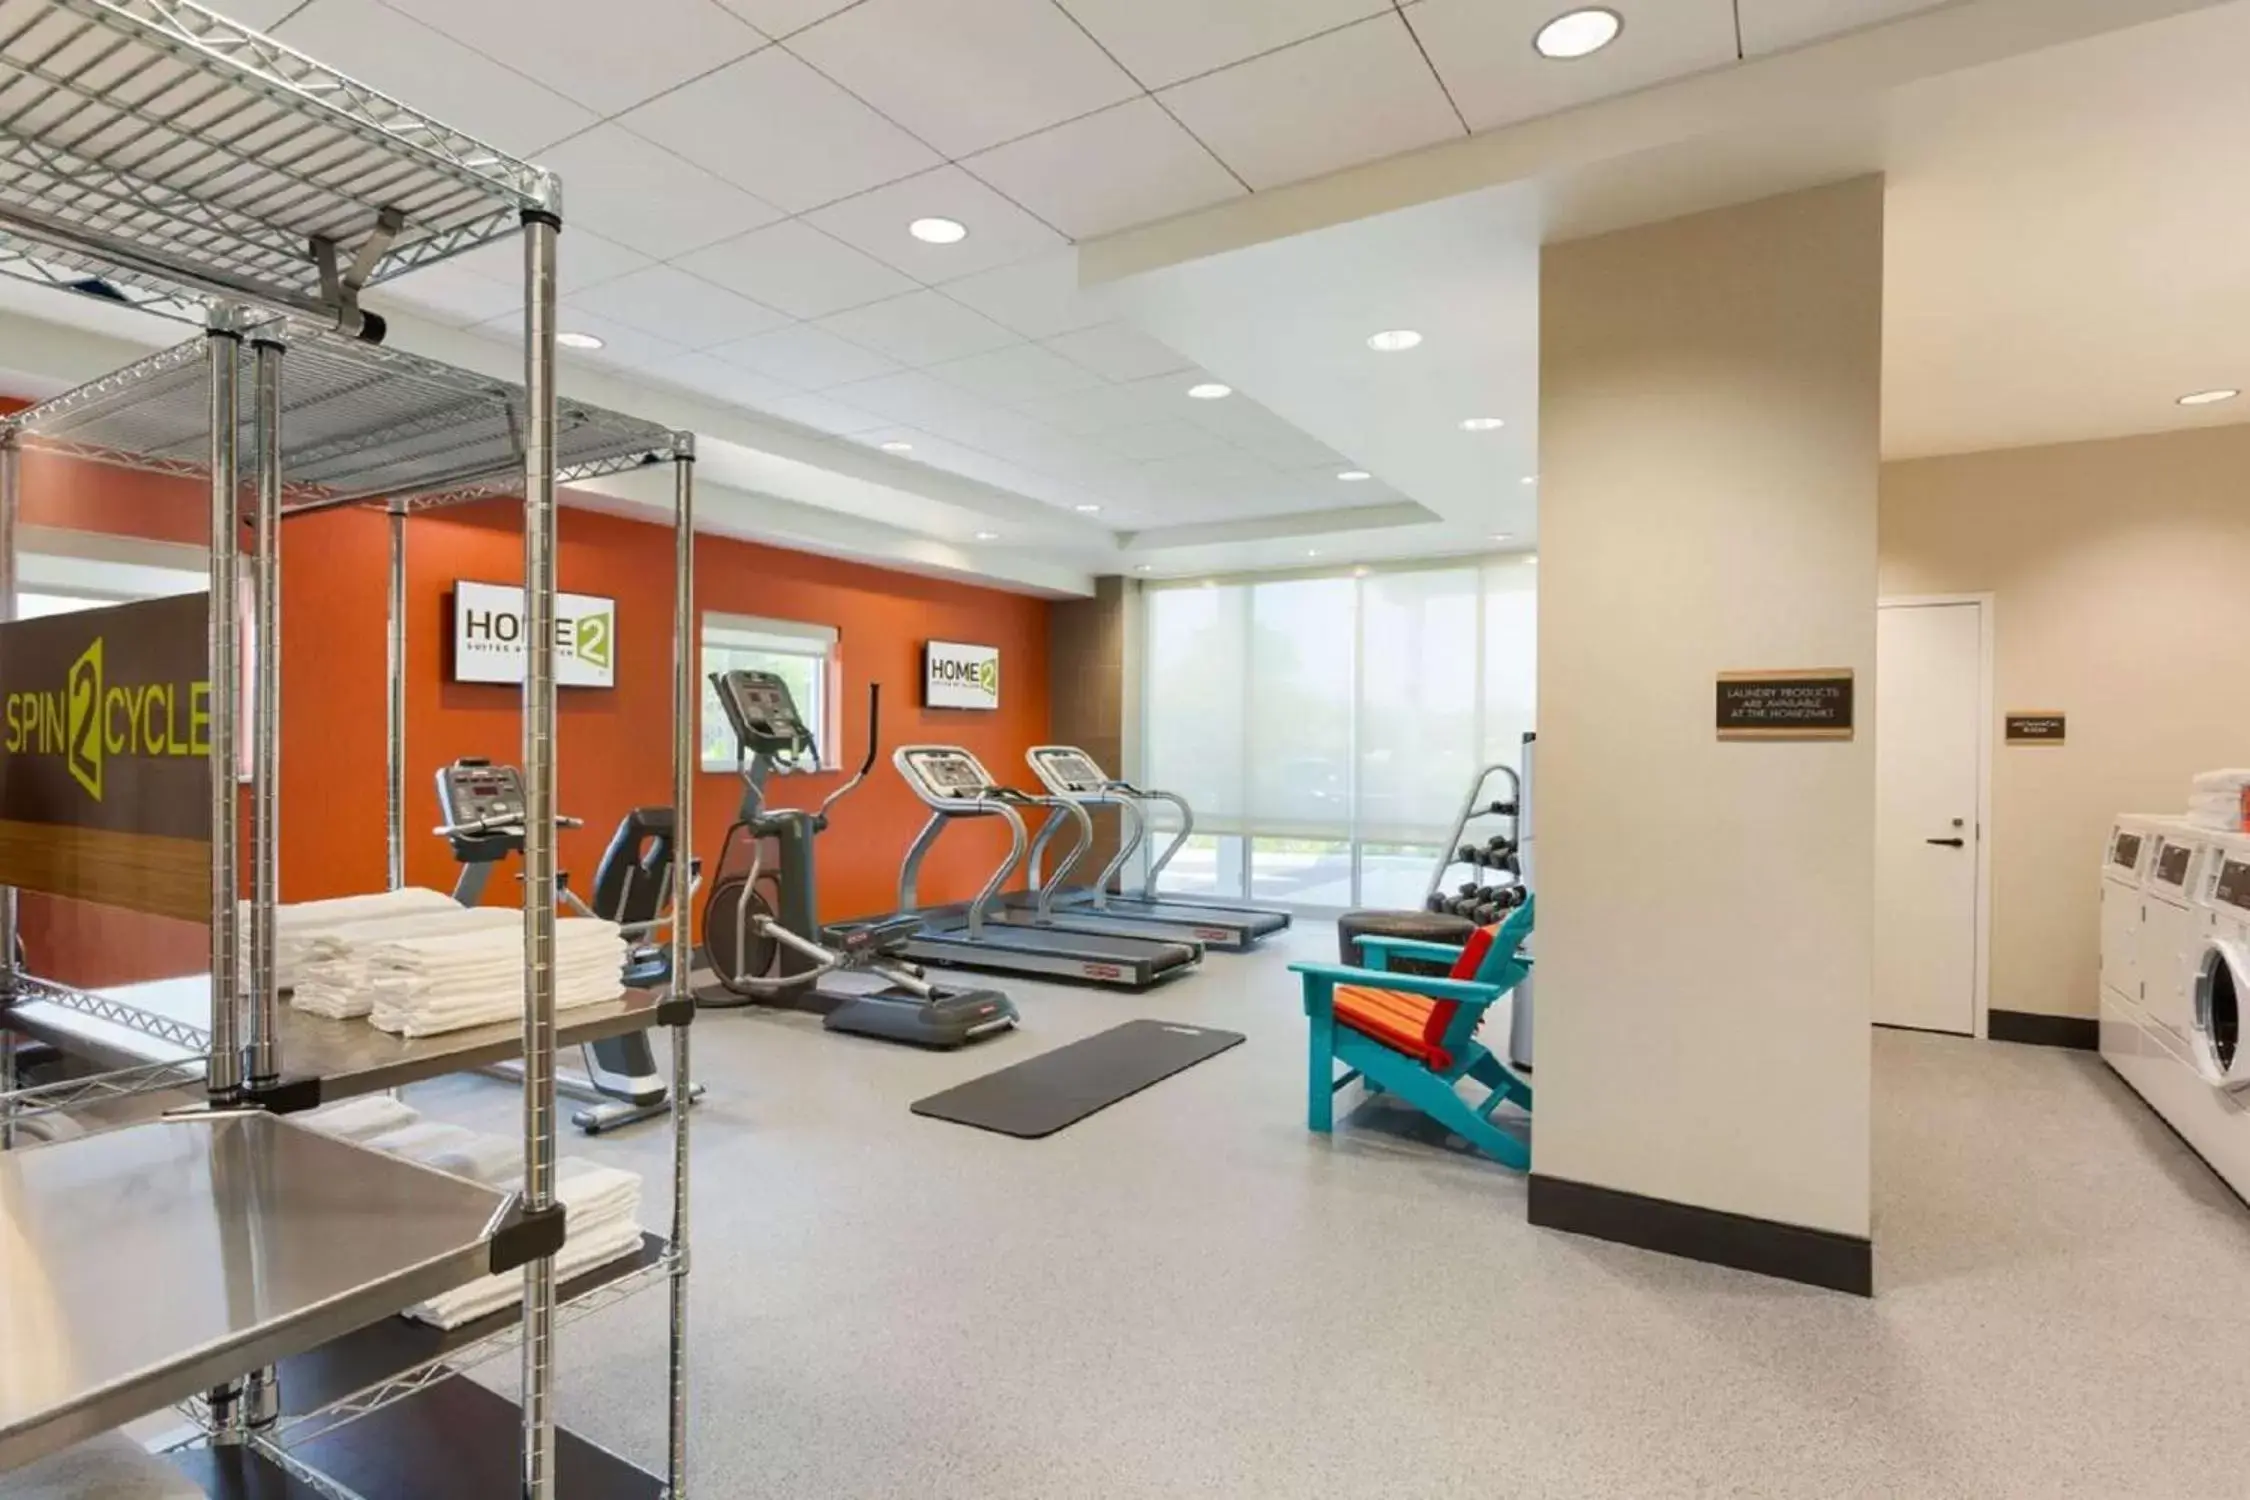 Fitness centre/facilities, Fitness Center/Facilities in Home2 Suites by Hilton Albany Airport/Wolf Rd